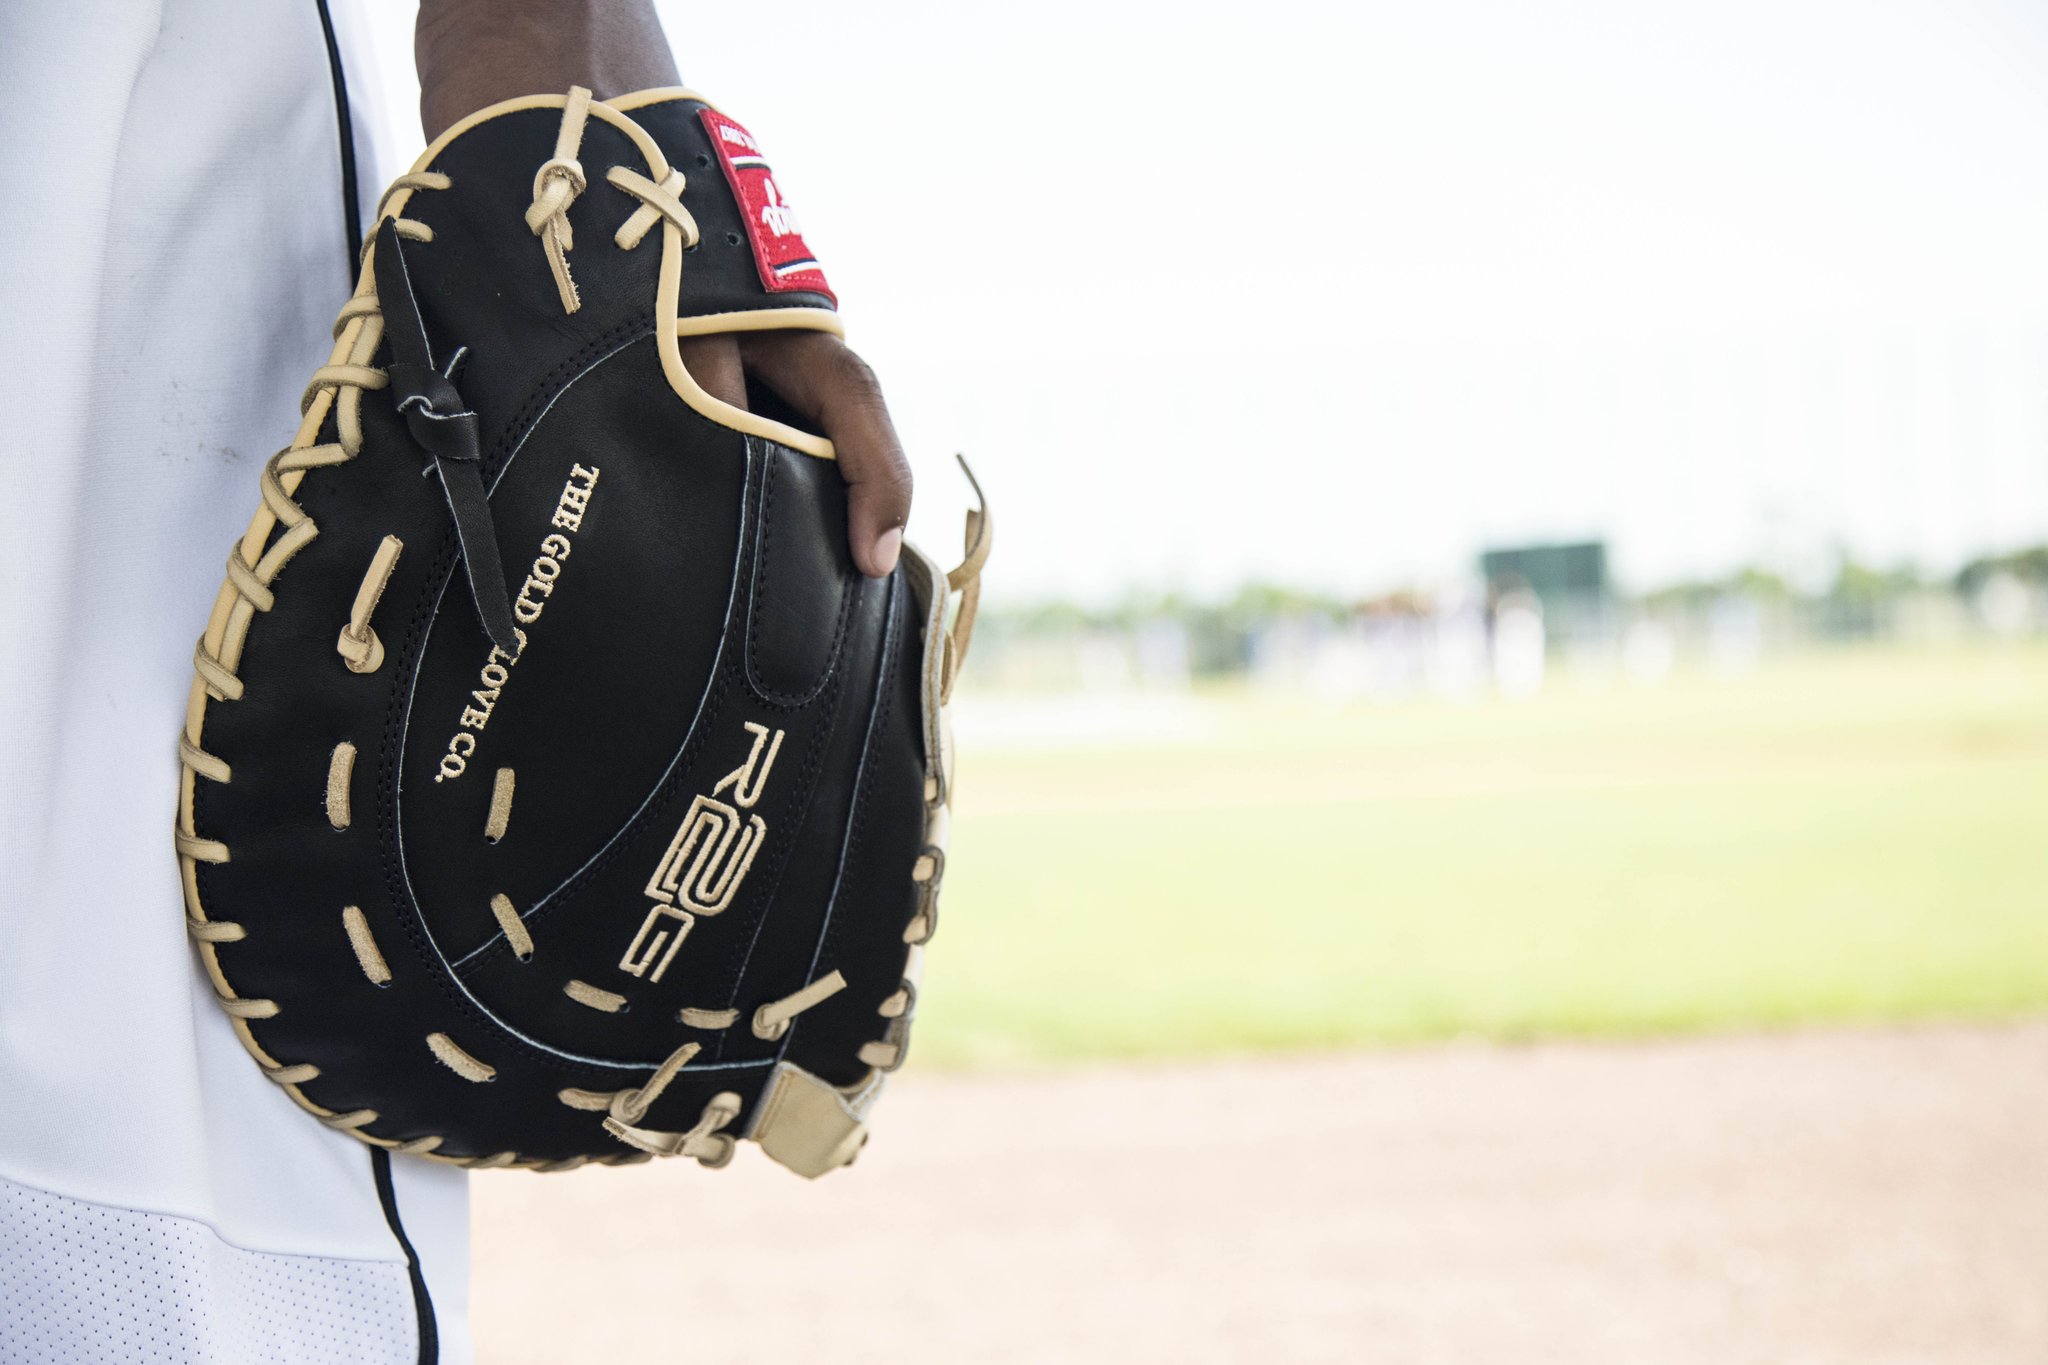 Rawlings Sports on Twitter: "This new Heart of the Hide ...